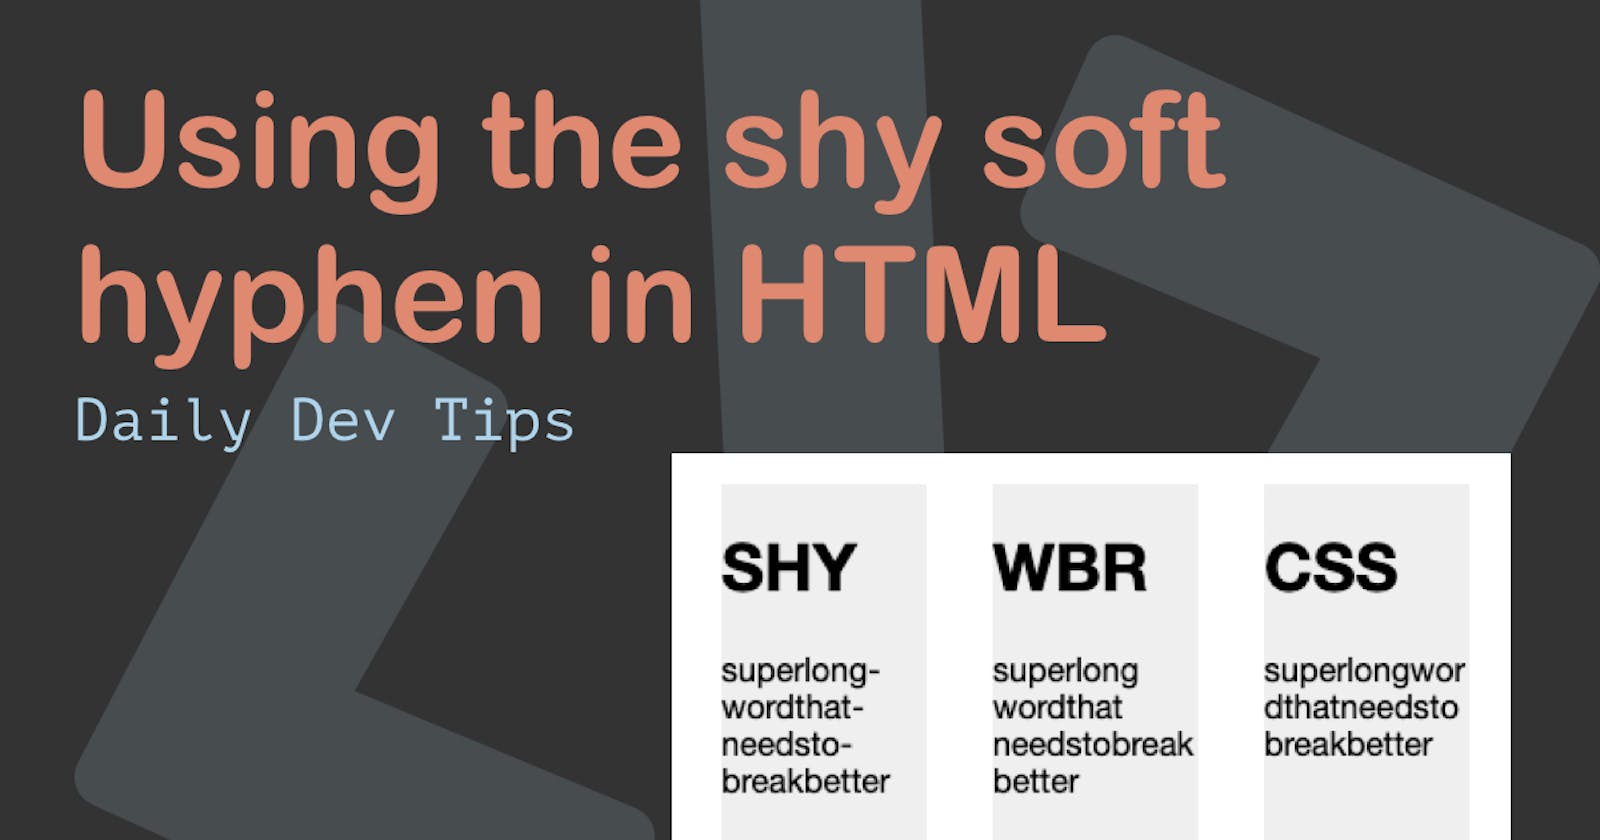 Using the shy soft hyphen in HTML